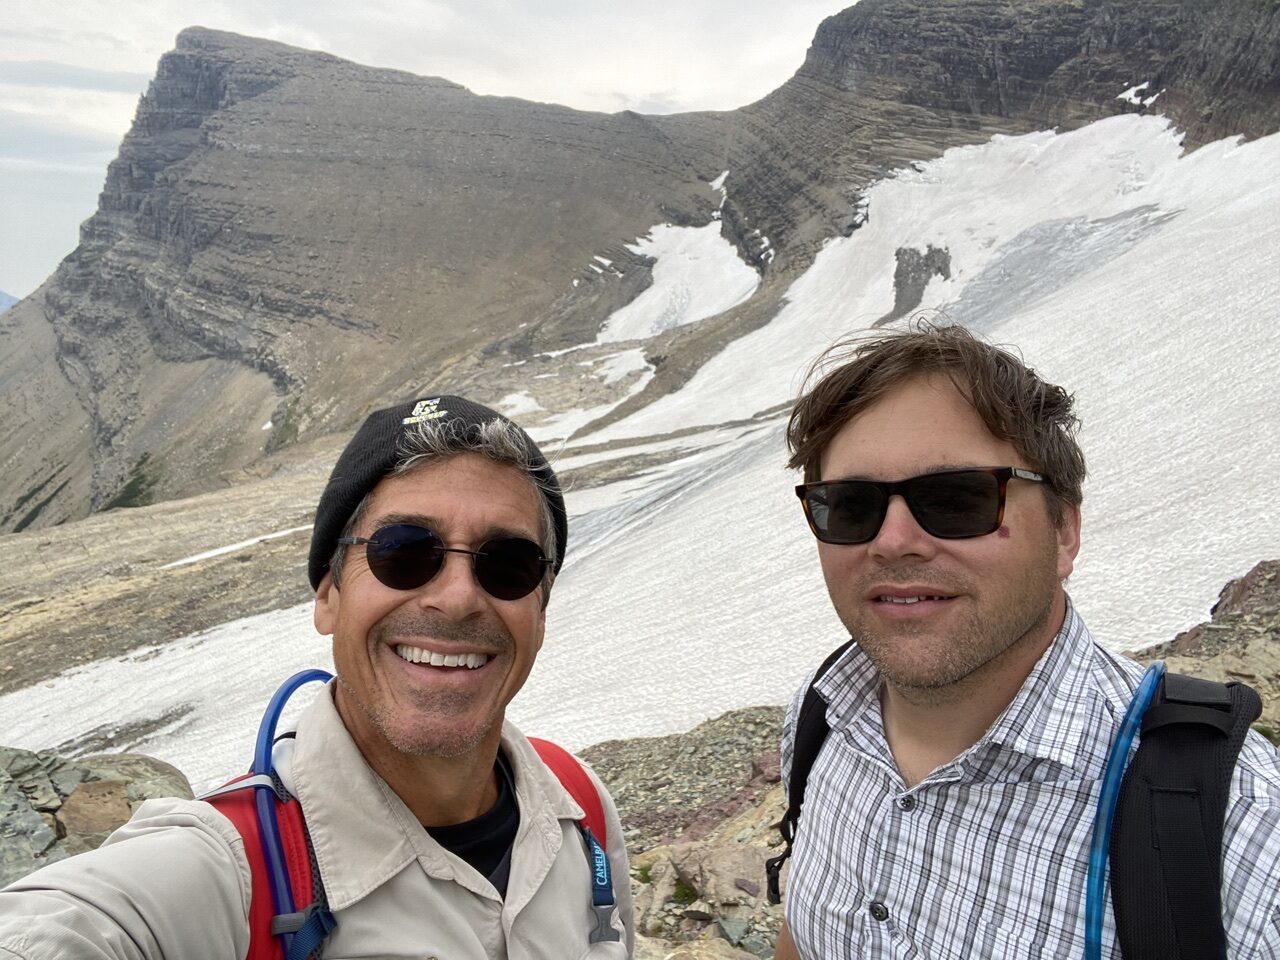 Jeff noel and Jody Maberry next to a glacier